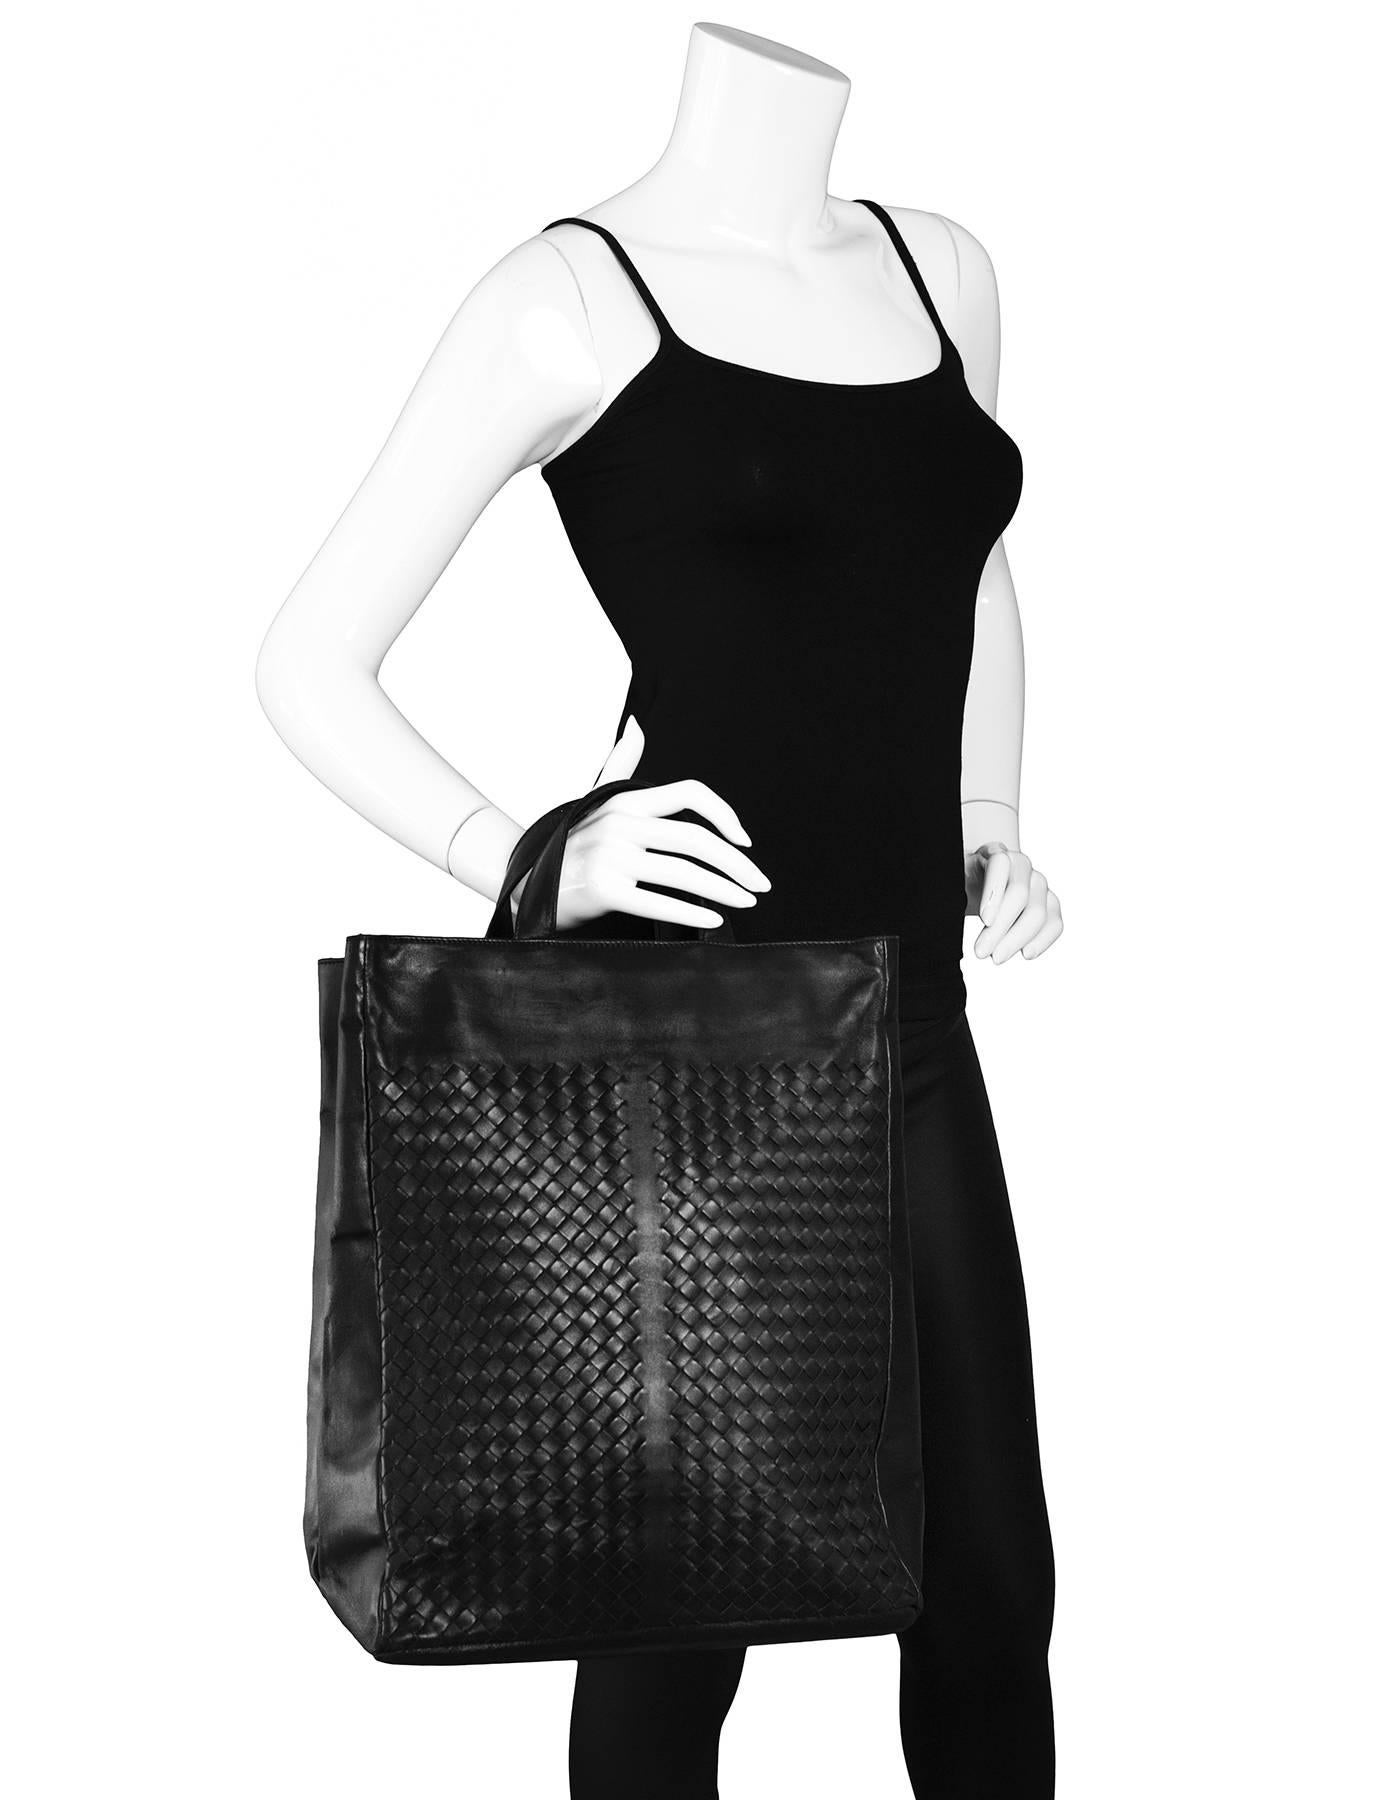 Bottega Veneta Black Intrecciato Tote

Made In: Italy
Color: Black
Hardware: None
Materials: Leather
Lining: Beige textile
Closure/Opening: Open top
Exterior Pockets: None
Interior Pockets: Zip pocket, small phone pocket
Overall Condition: Excellent